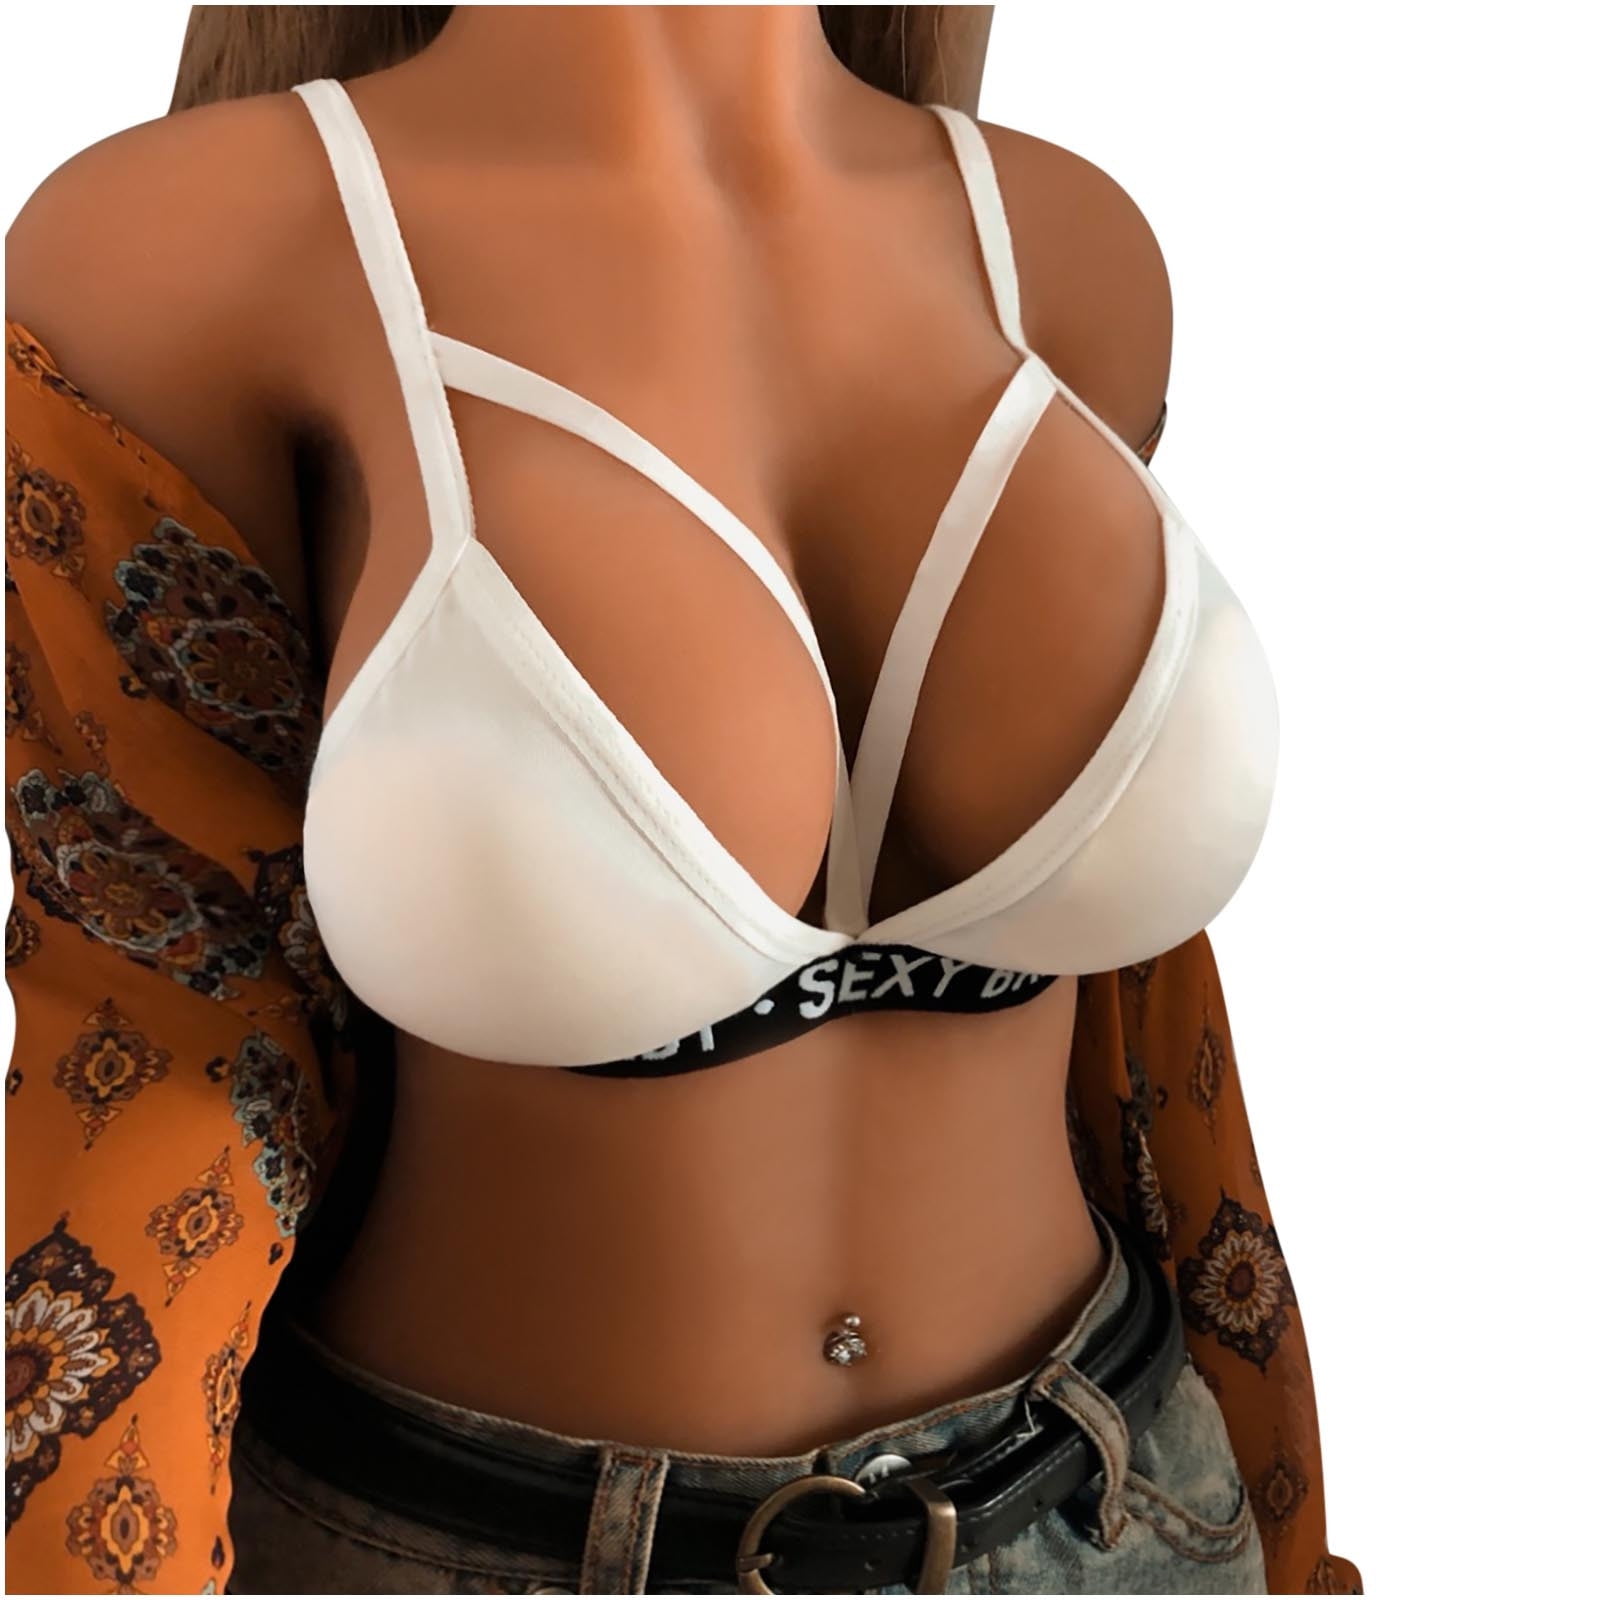 VerPetridure Sexy Lingerie for Women Plus Size Alluring Women Cage Bra  Elastic Cage Bra Strappy Hollow Out Bra Bustier 